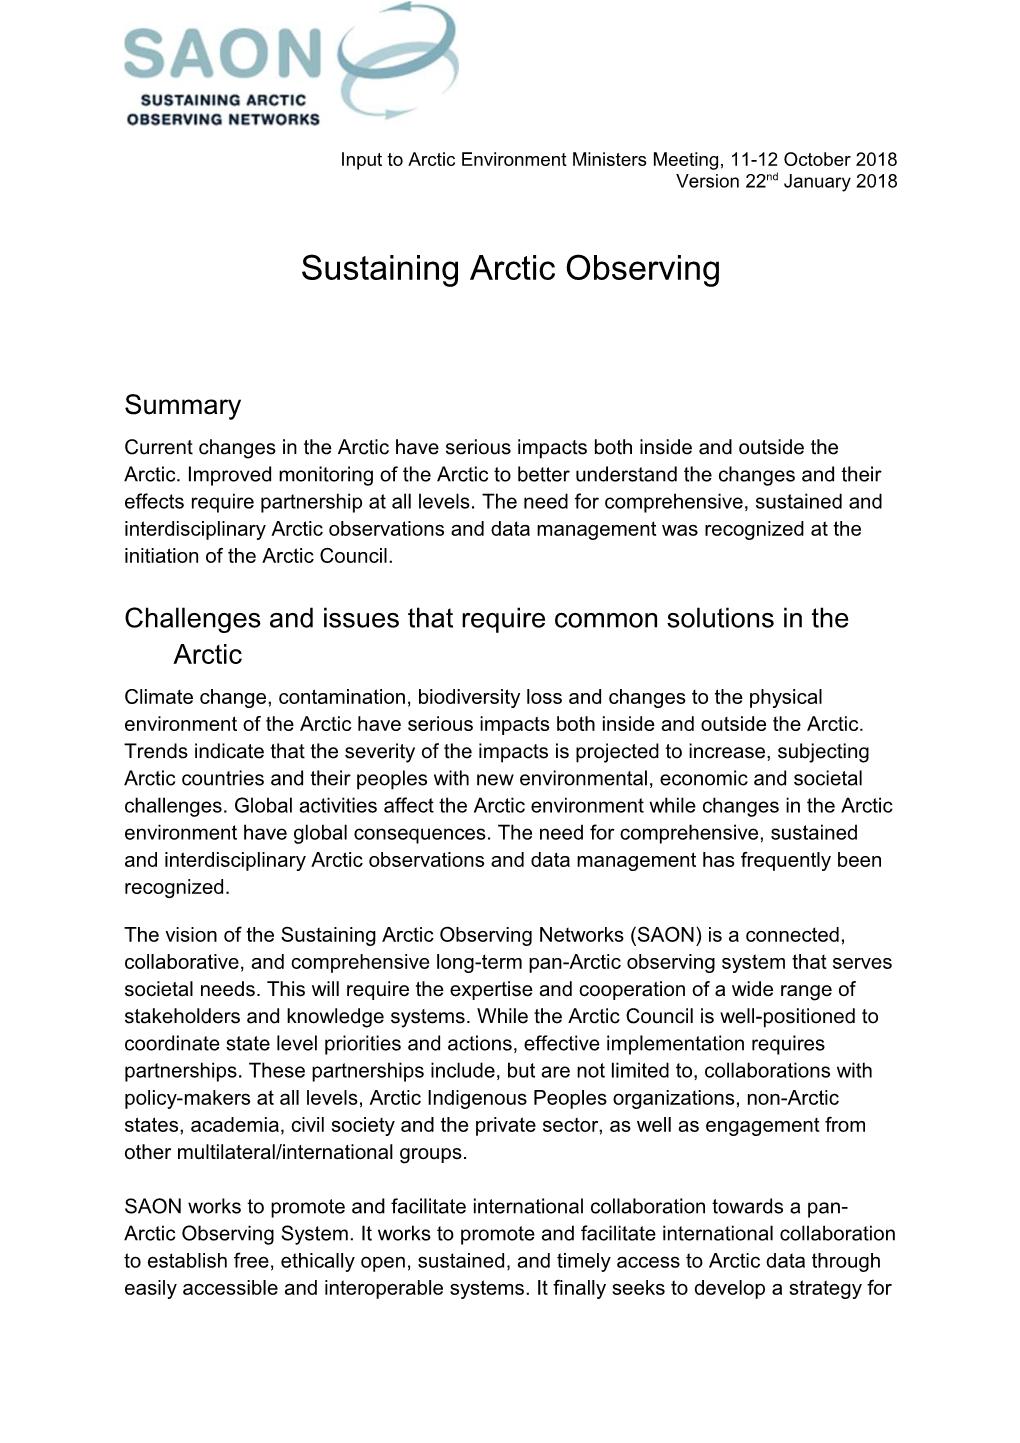 Challenges and Issues That Require Common Solutions in the Arctic